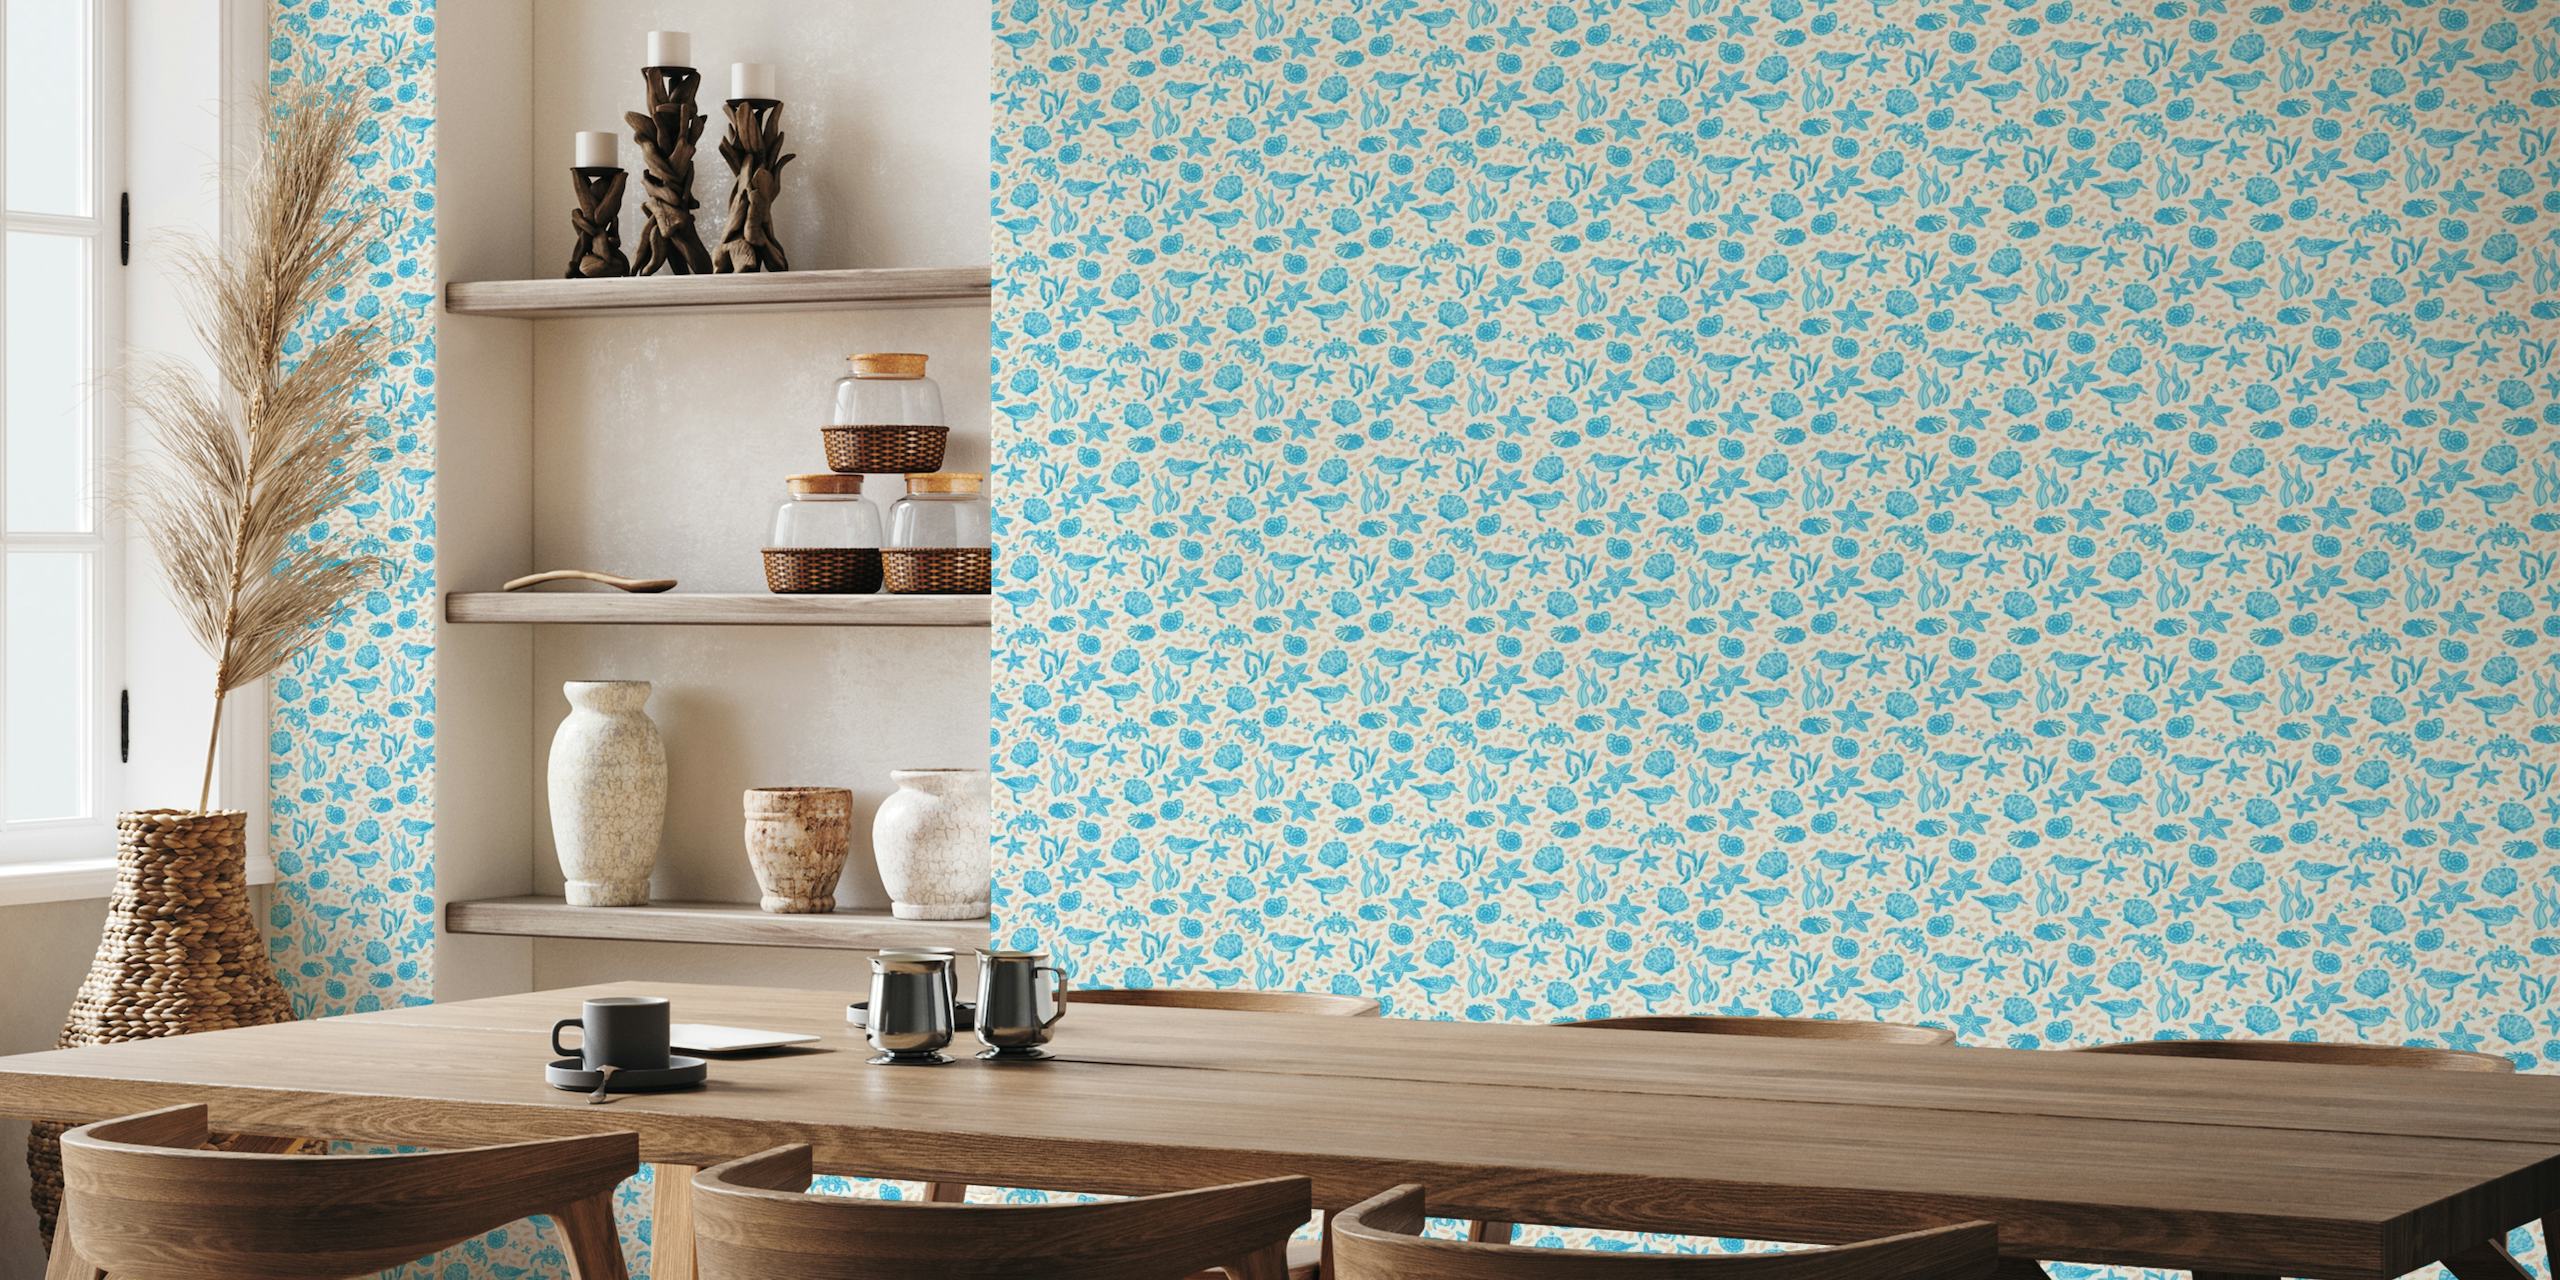 Wall mural with blue ocean creatures pattern including dolphins, sea turtles, and starfish